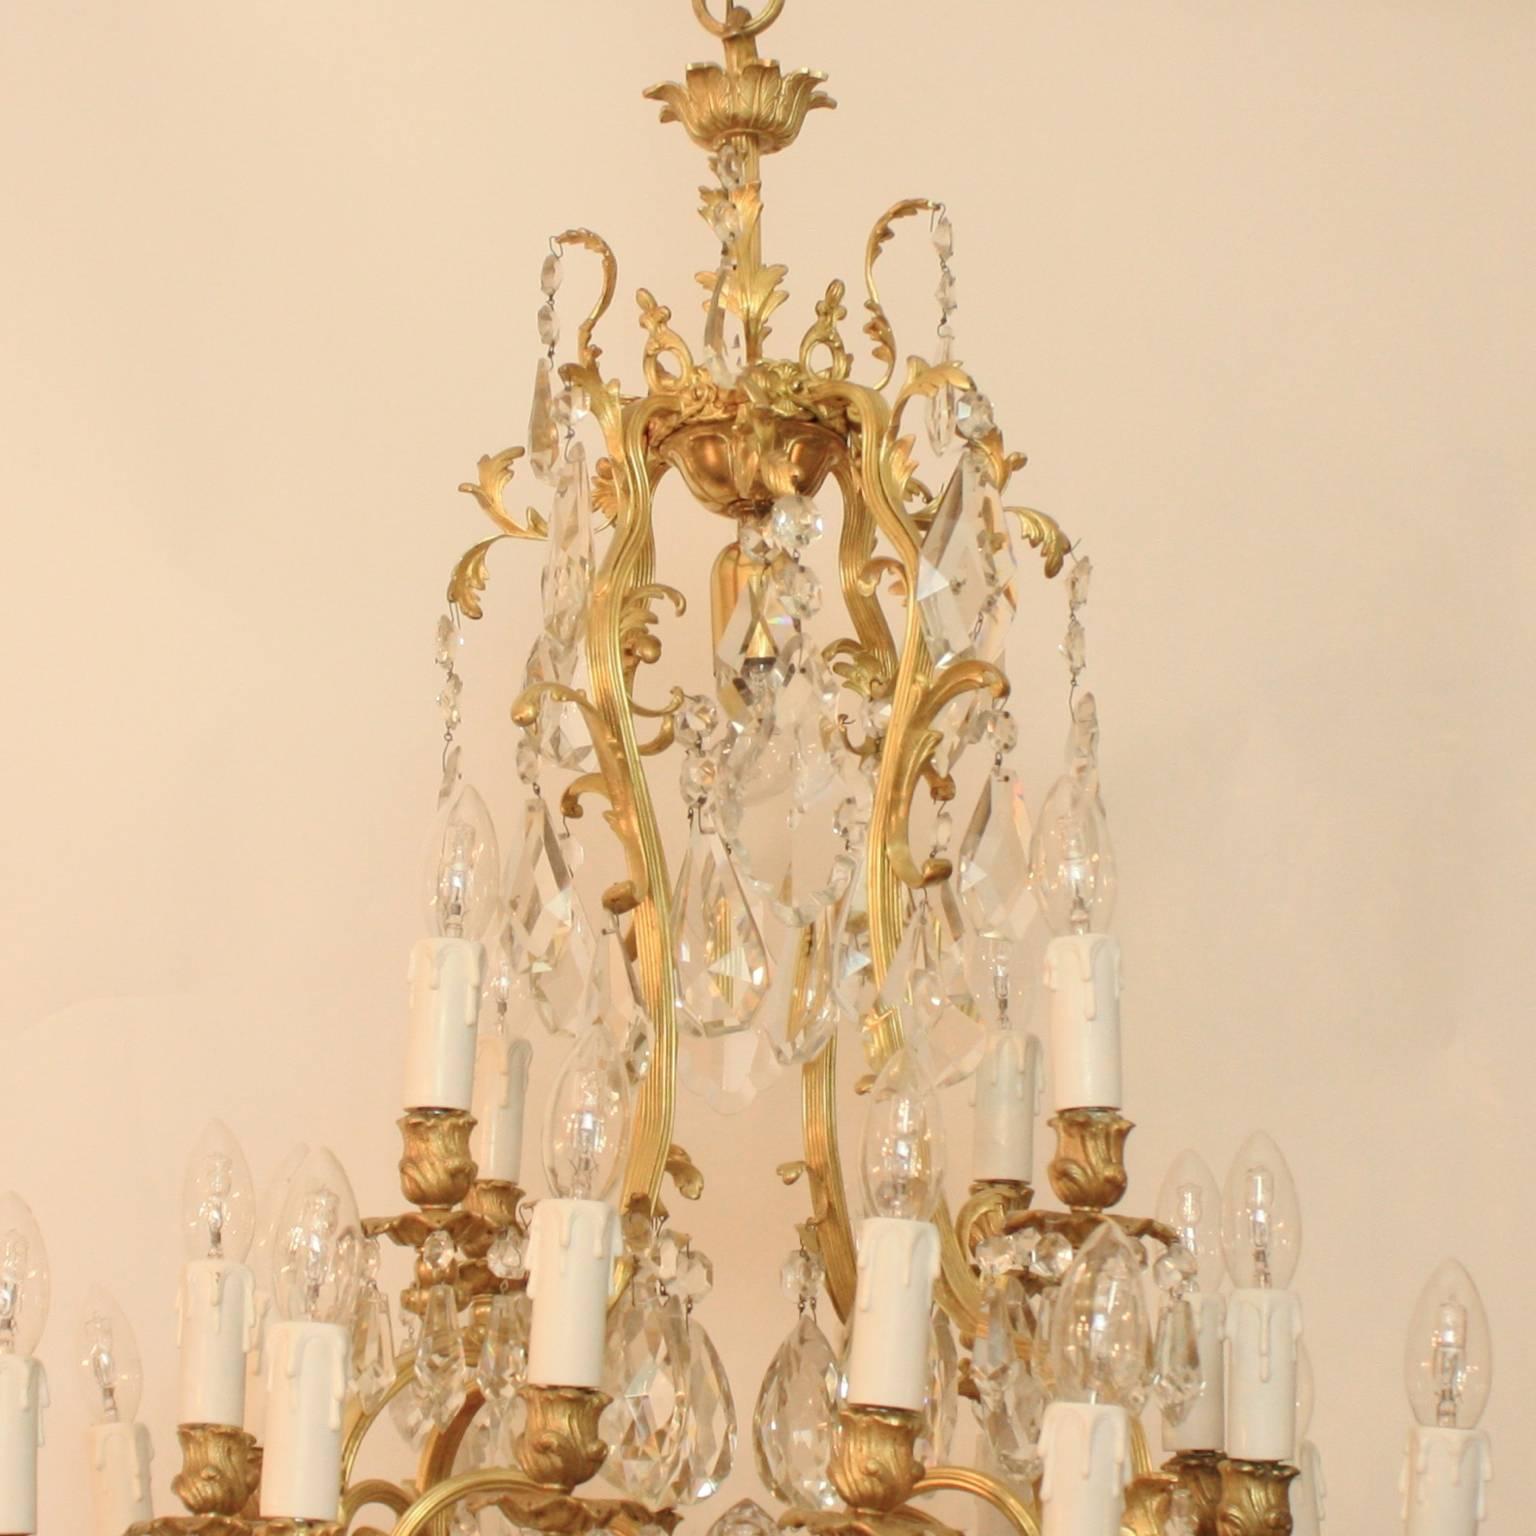 A rare and exceptional large 19th century French gilt-bronze chandelier with a central solid cut-crystal finial surrounded by an open gilt-bronze cage frame with three tiers of scrolled and fluted branches issuing altogether 20 lights, each with